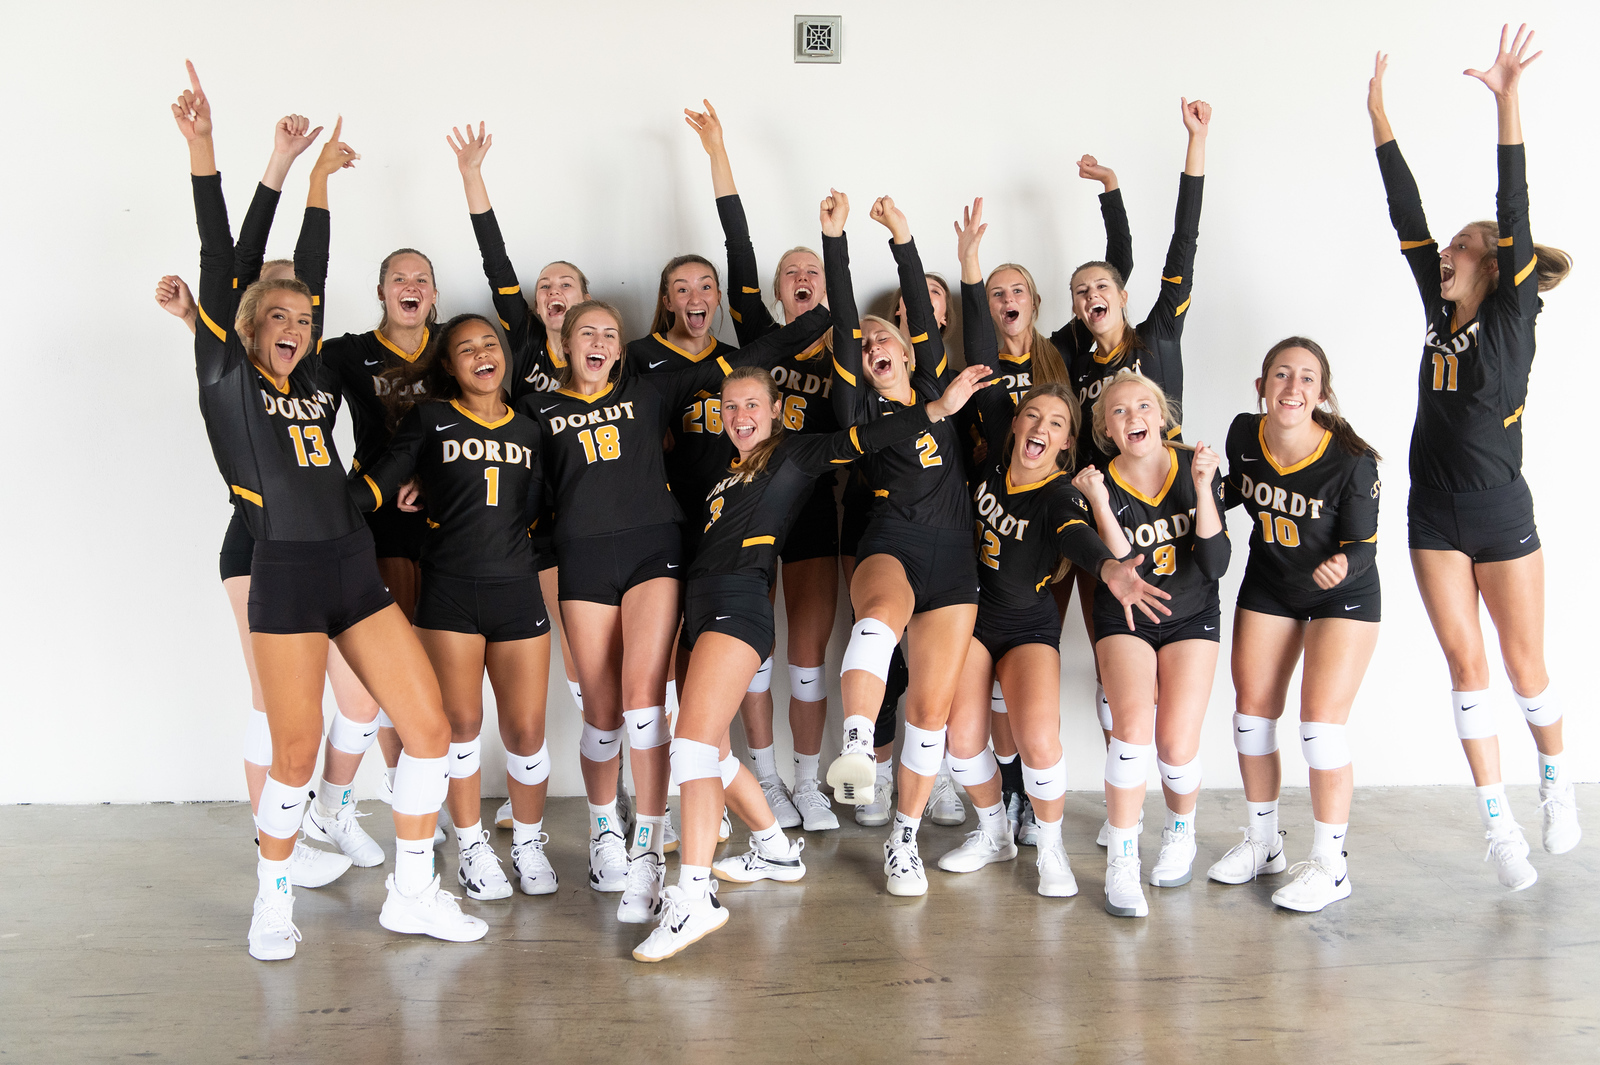 The Dordt volleyball team poses for a picture